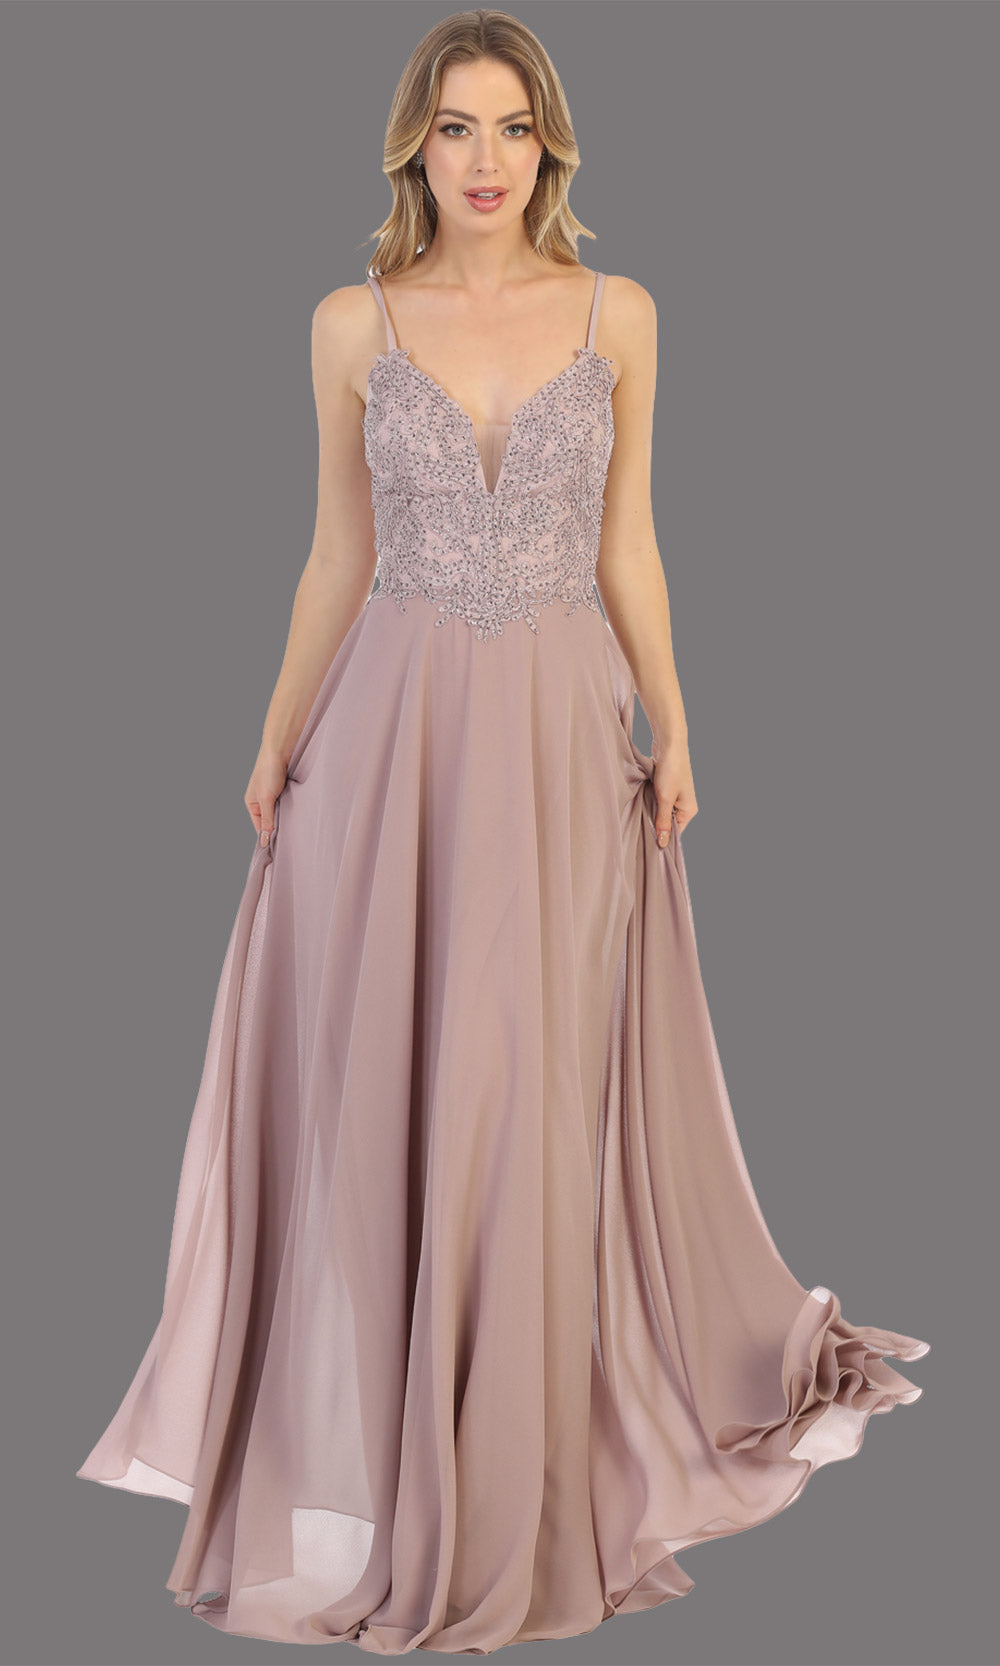 Mayqueen MQ1750 long mauv flowy sleek & sexy dress w/straps. This dusty rose dress is perfect for bridesmaid dresses, simple wedding guest dress, prom dress, gala, black tie wedding. Plus sizes are available, evening party dress.jpg